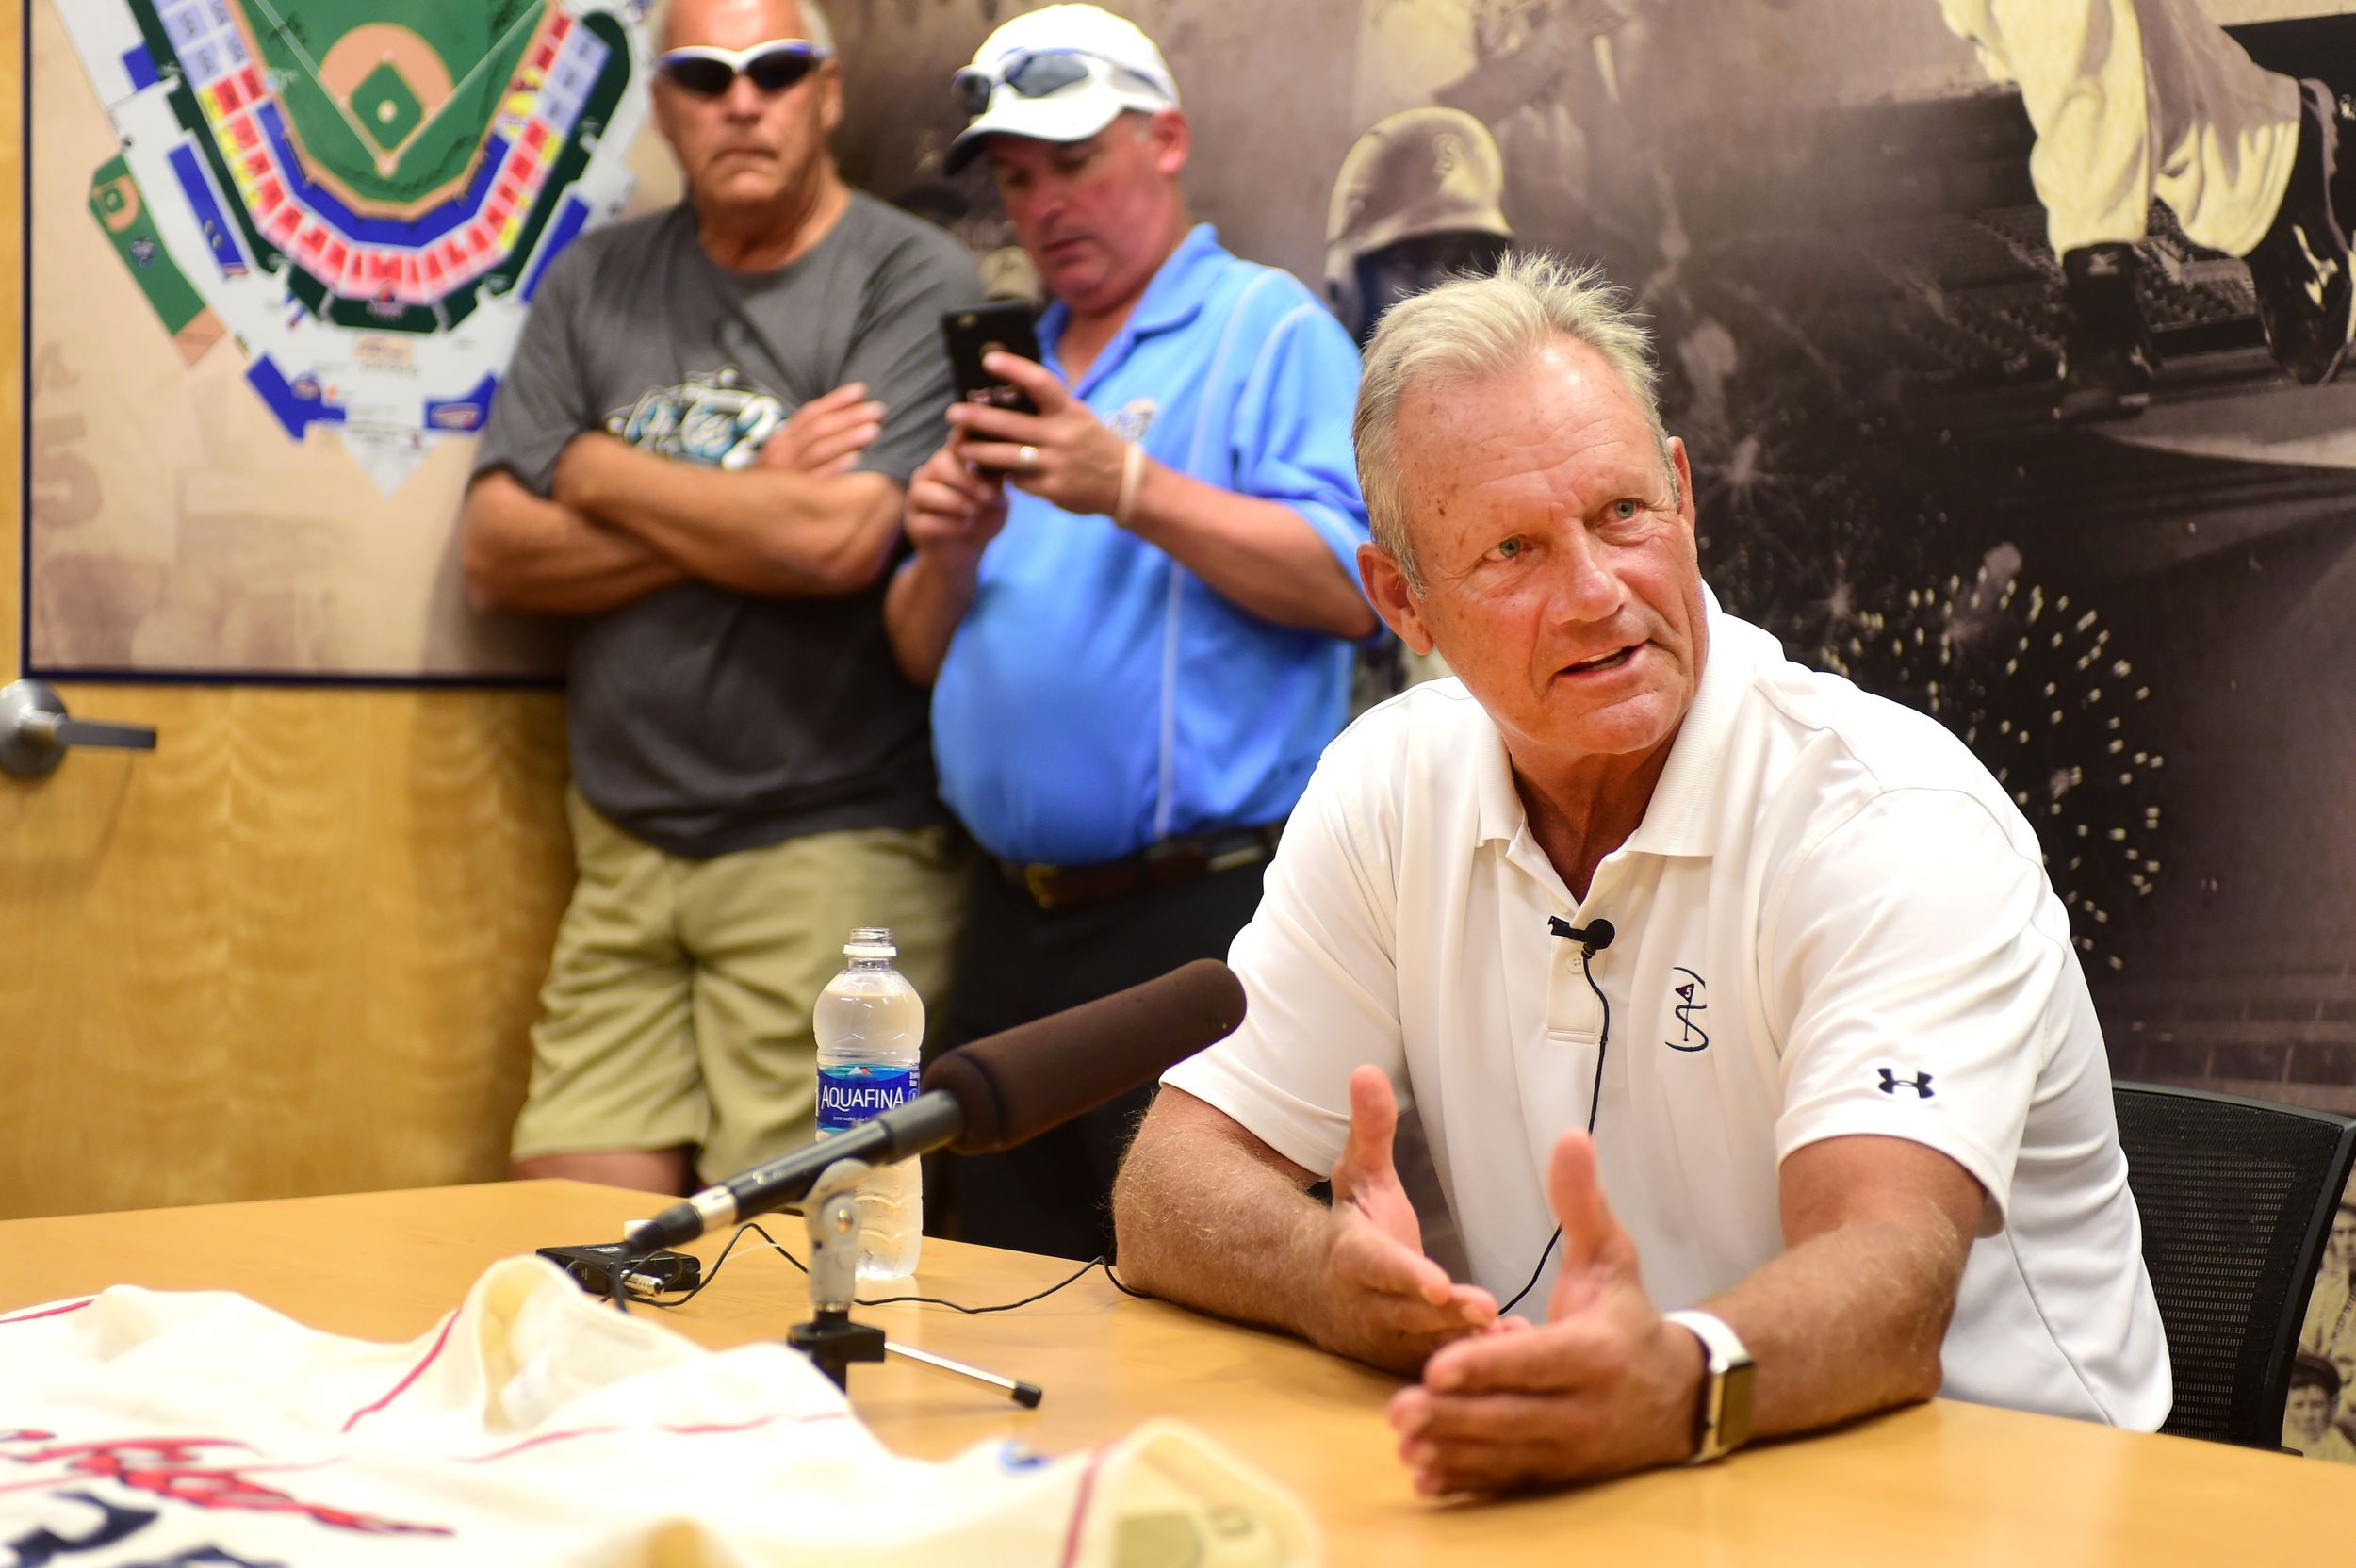 George Brett and his brothers share a love for Spokane and Spokane Indians  baseball